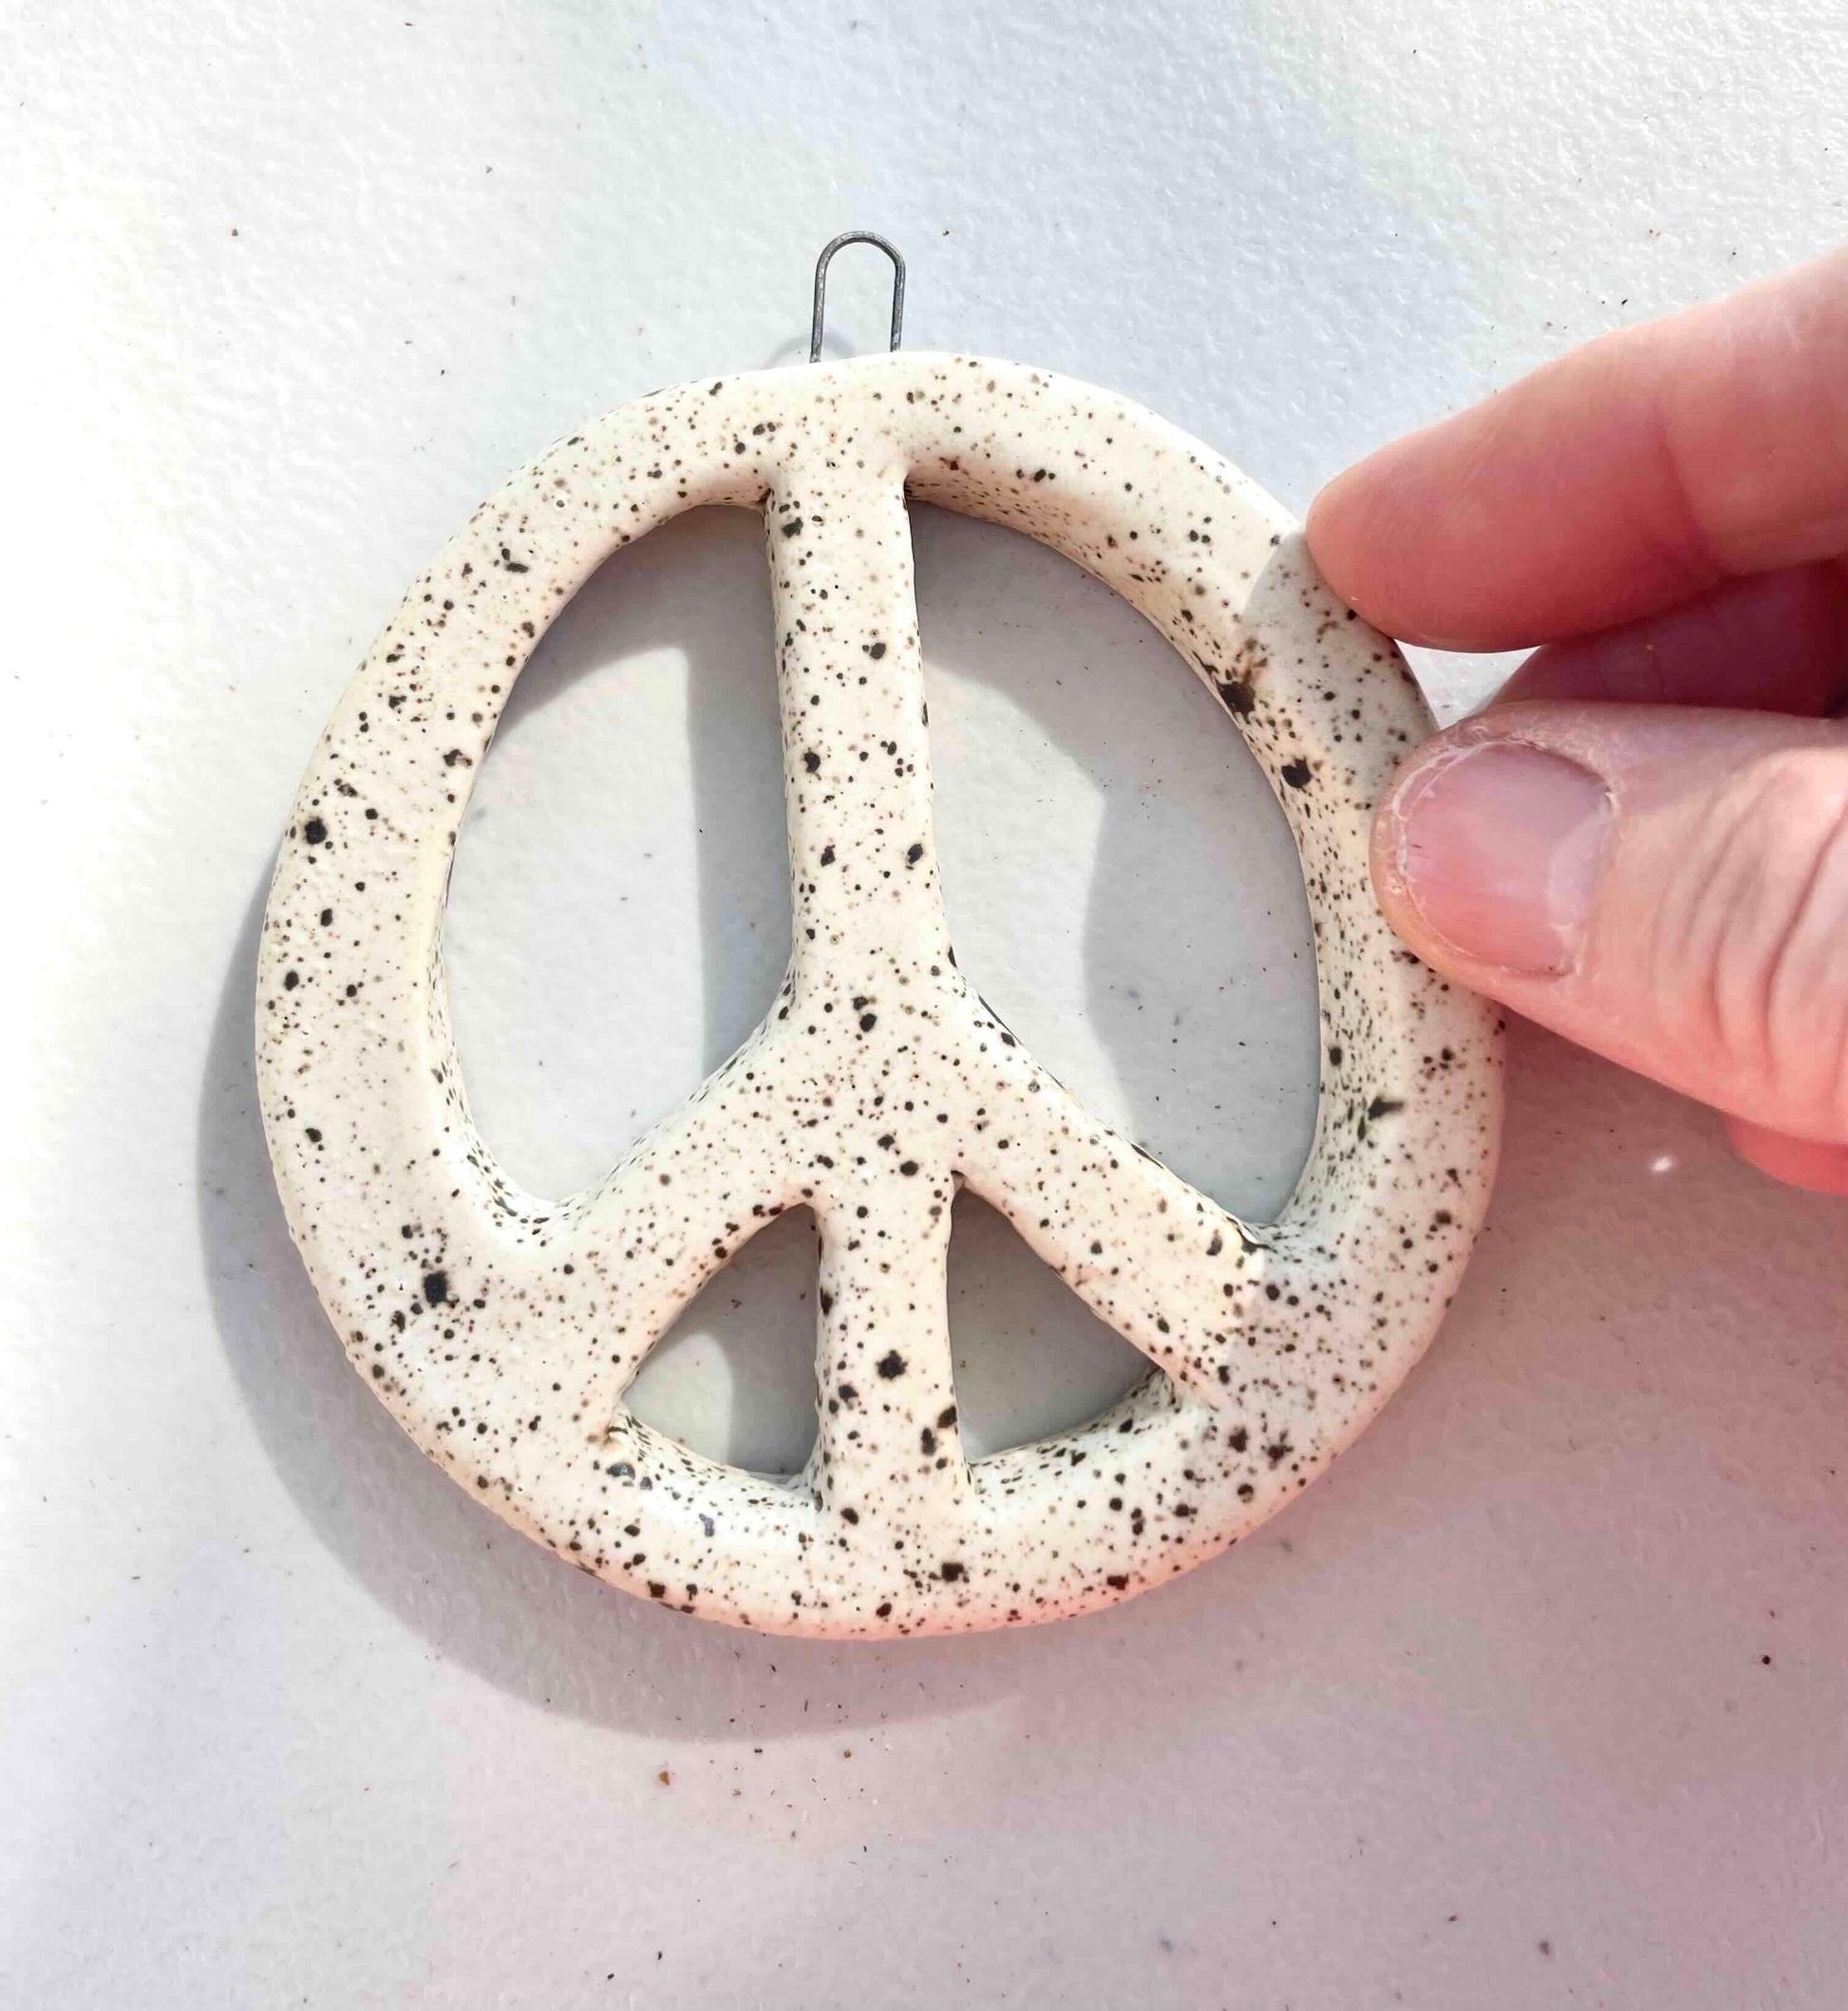 peace symbol ornament or wall hanging by Hey Moon Ceramics in white stoneware